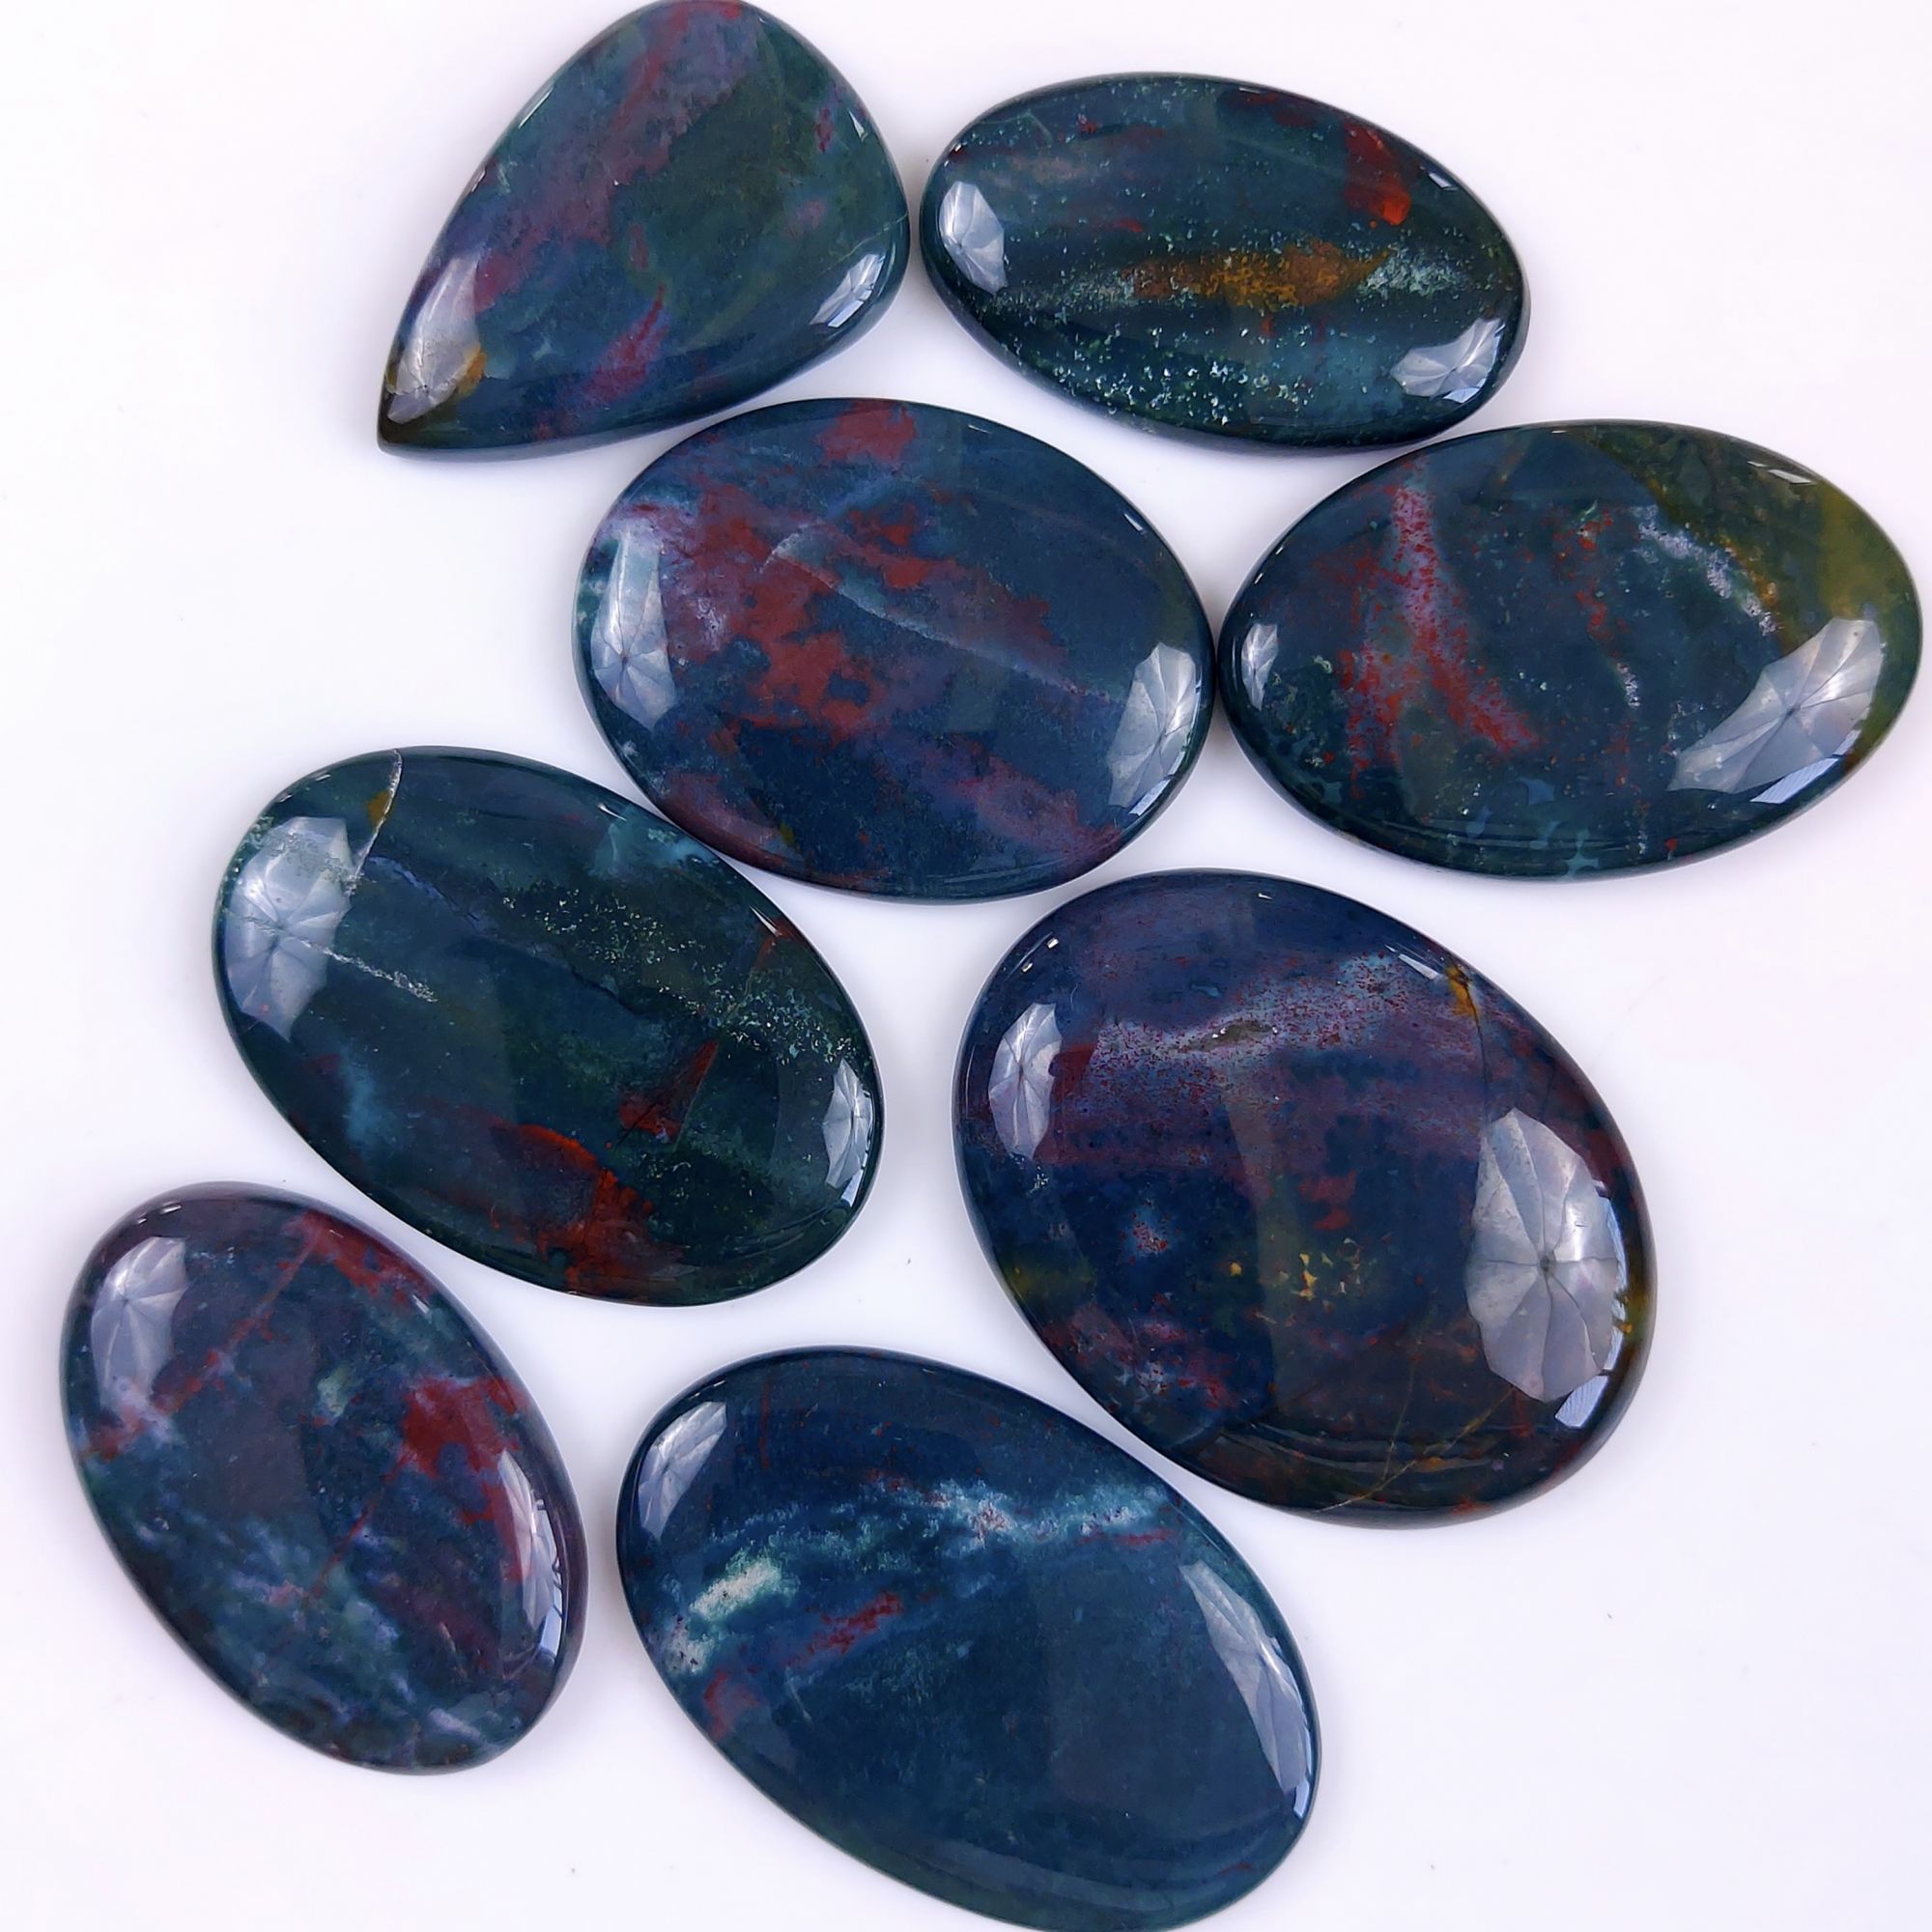 8Pcs 488Cts  Natural Green Blood Stone Loose Cabochon Gemstone Lot For Jewelry Making Gift For Her 45x30 37x22mm#900